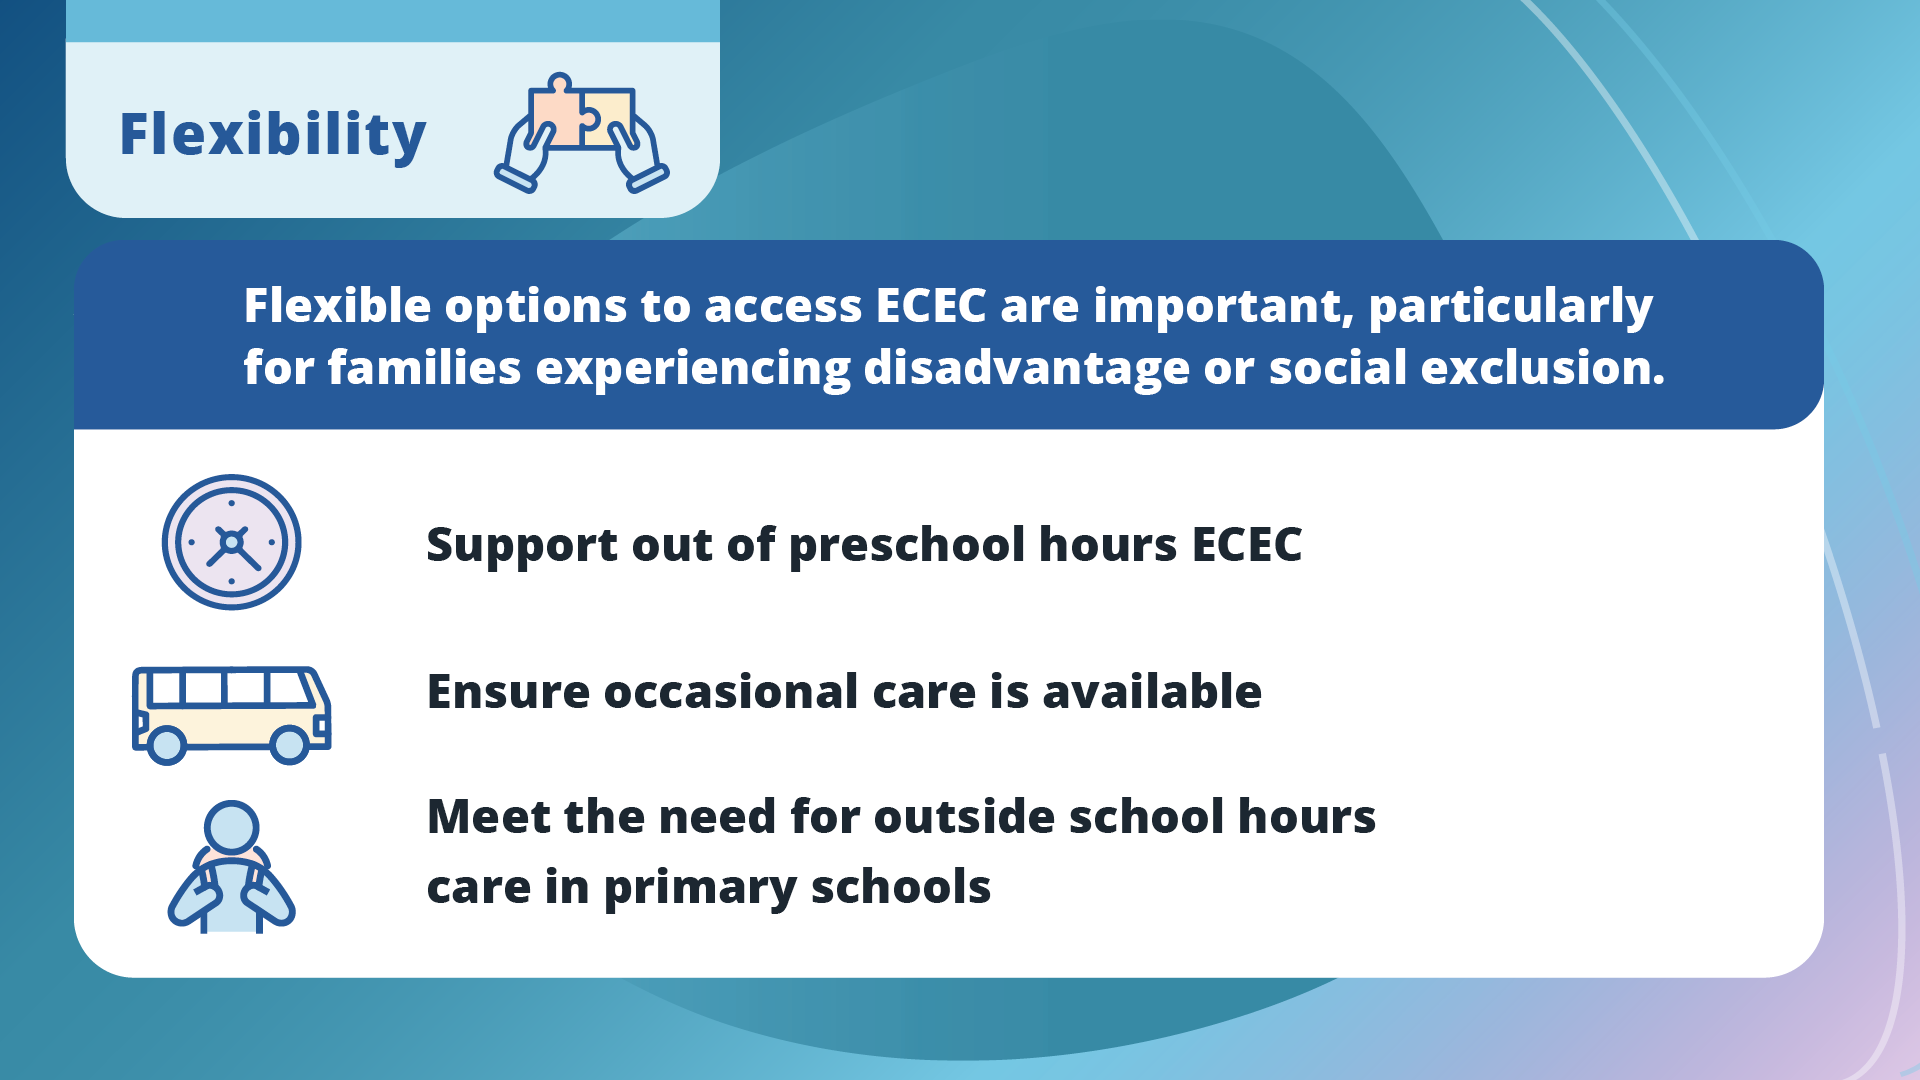 Flexibility. Flexible options to access ECEC are important, particularly for families experiencing disadvantage or social exclusion. Support out of preschool hours ECEC. Ensure occasional care is available. Meet the need for outside school hours care in primary schools.